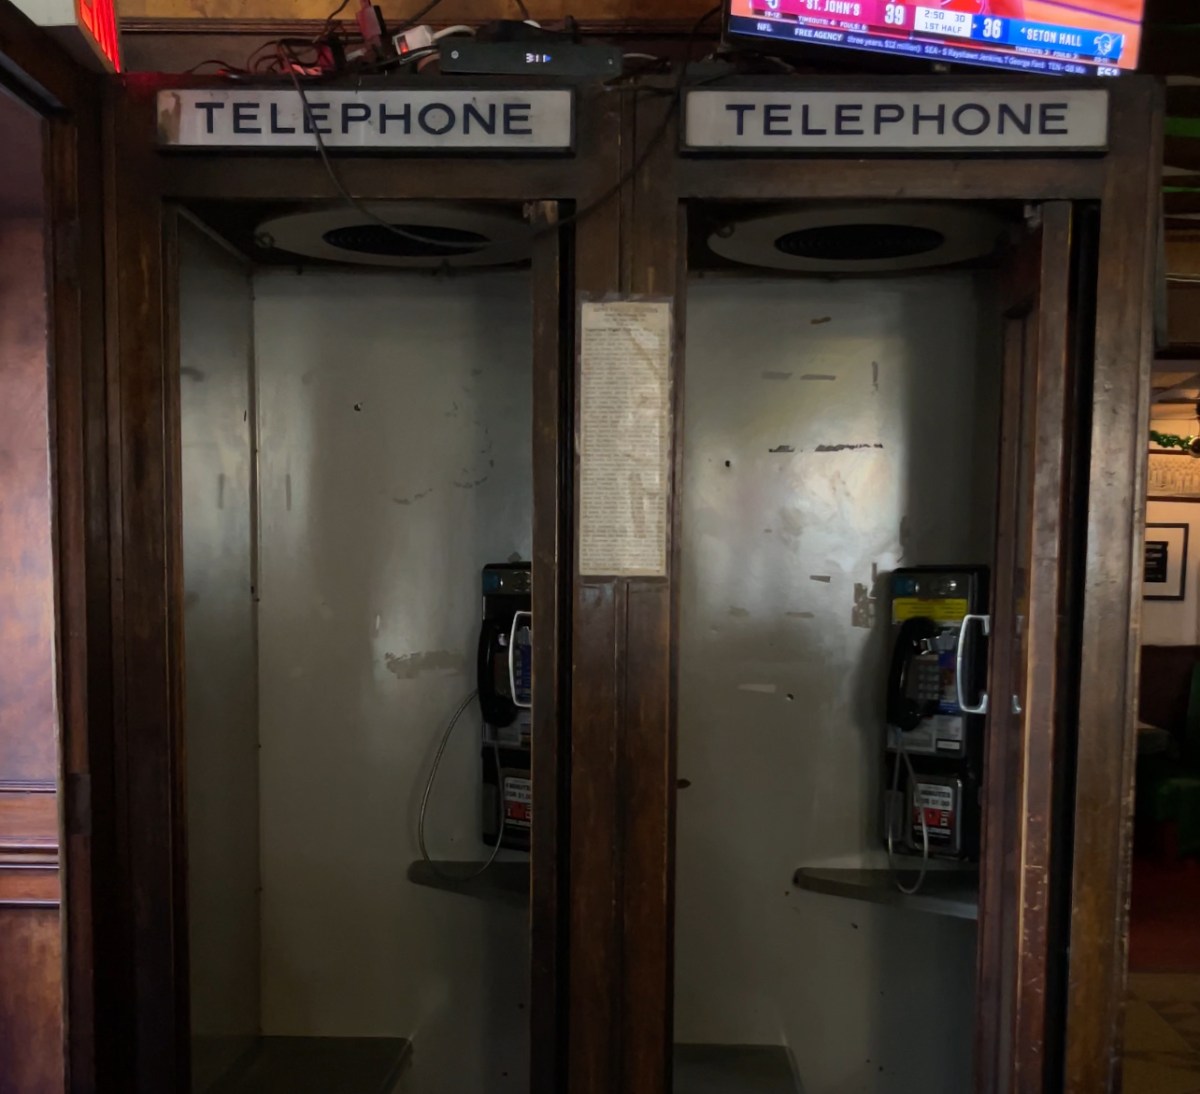 Old fashioned telephone booths